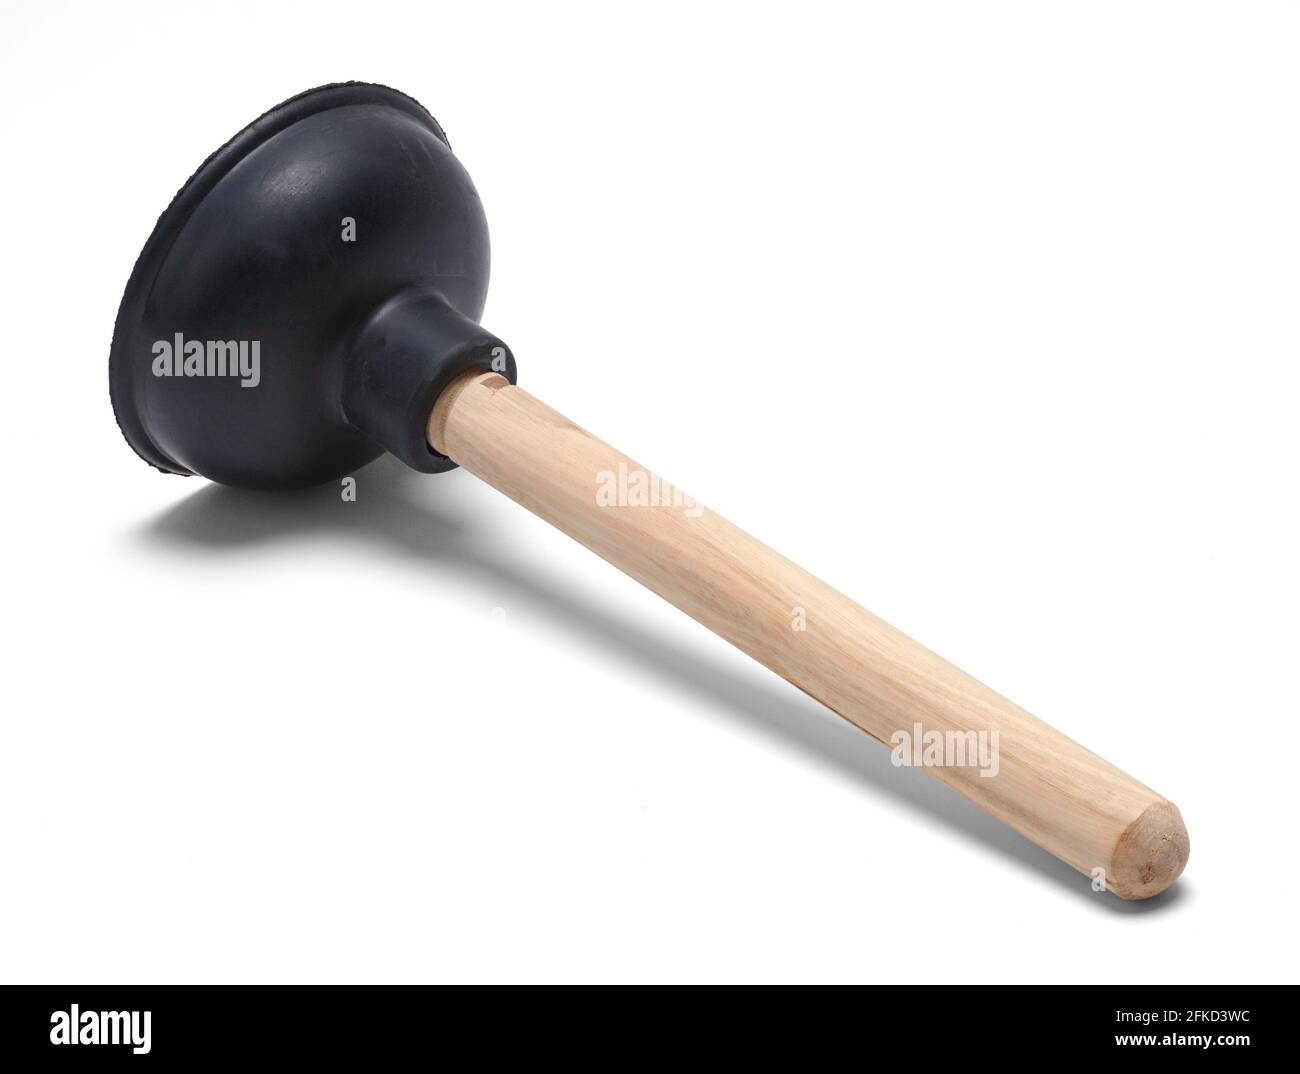 Black Rubber Plunger with Wood Handle Cut Out. Stock Photo